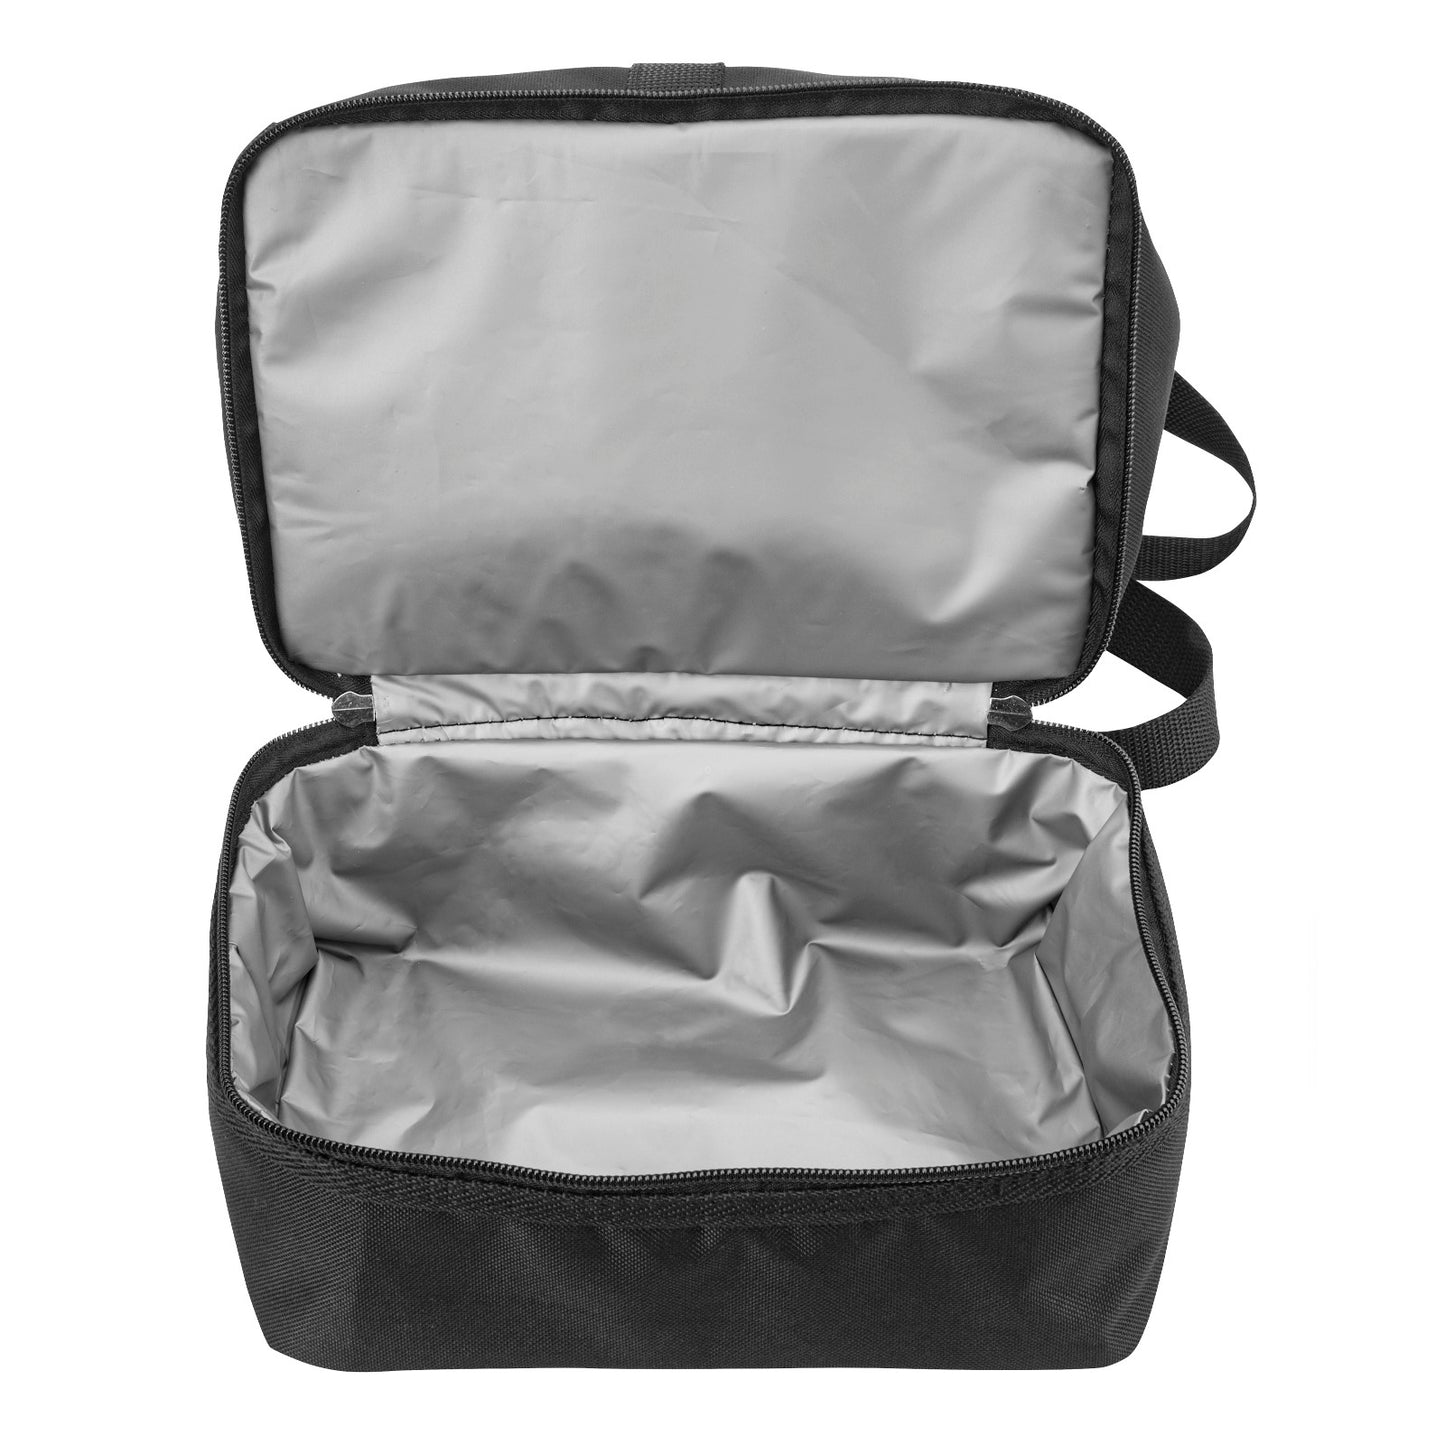 Insulated Meal & Snack Bag - Black